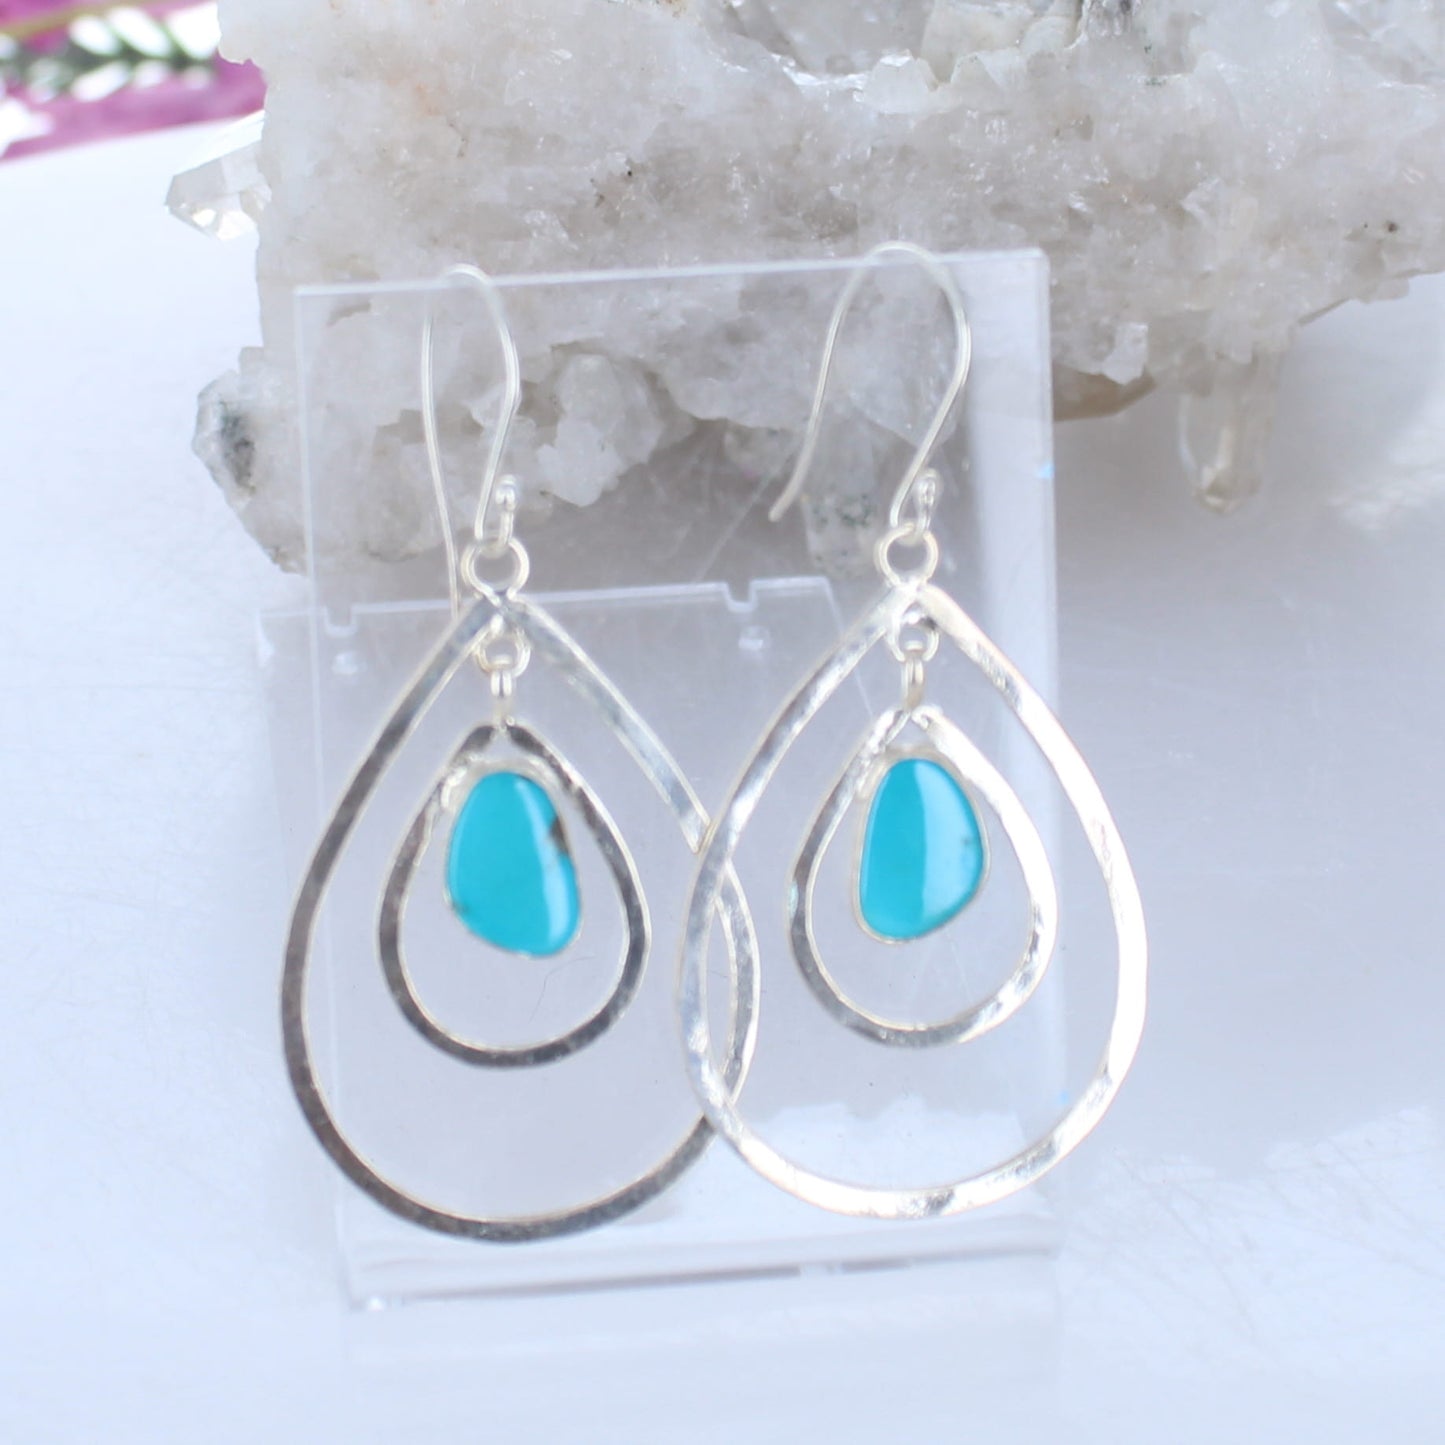 Bright Blue Sonoran Turquoise Earrings Double Hoops Sterling Silver